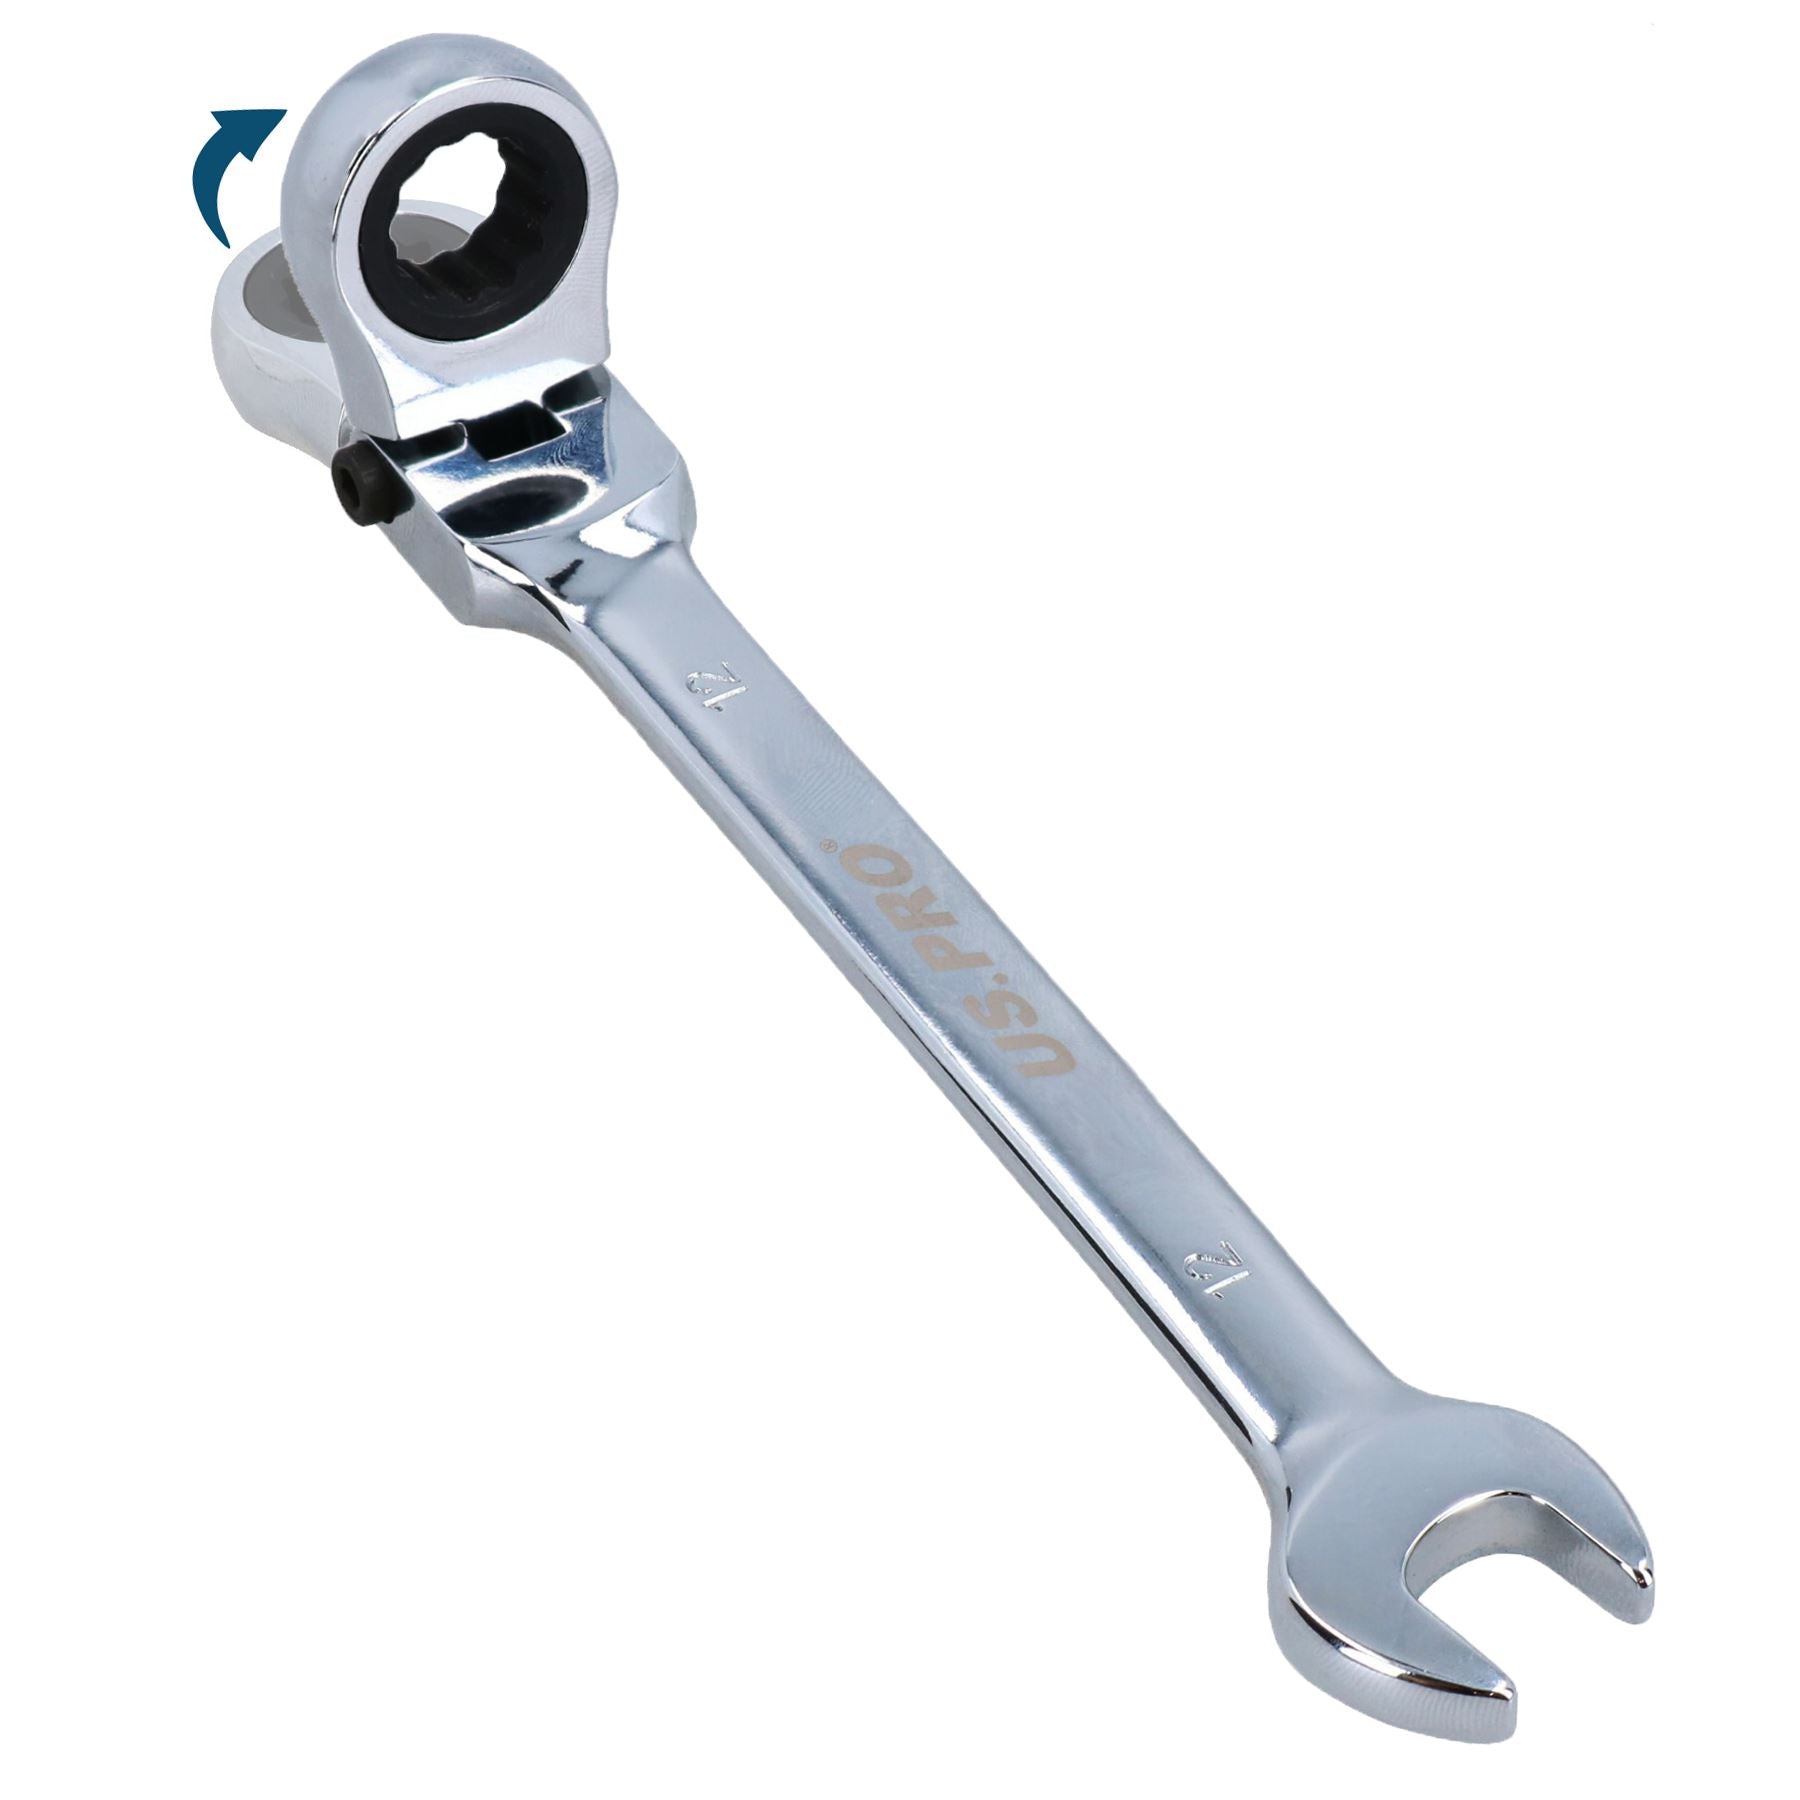 Flexible Headed Ratchet Combination Spanner Wrench with Integrated Lock